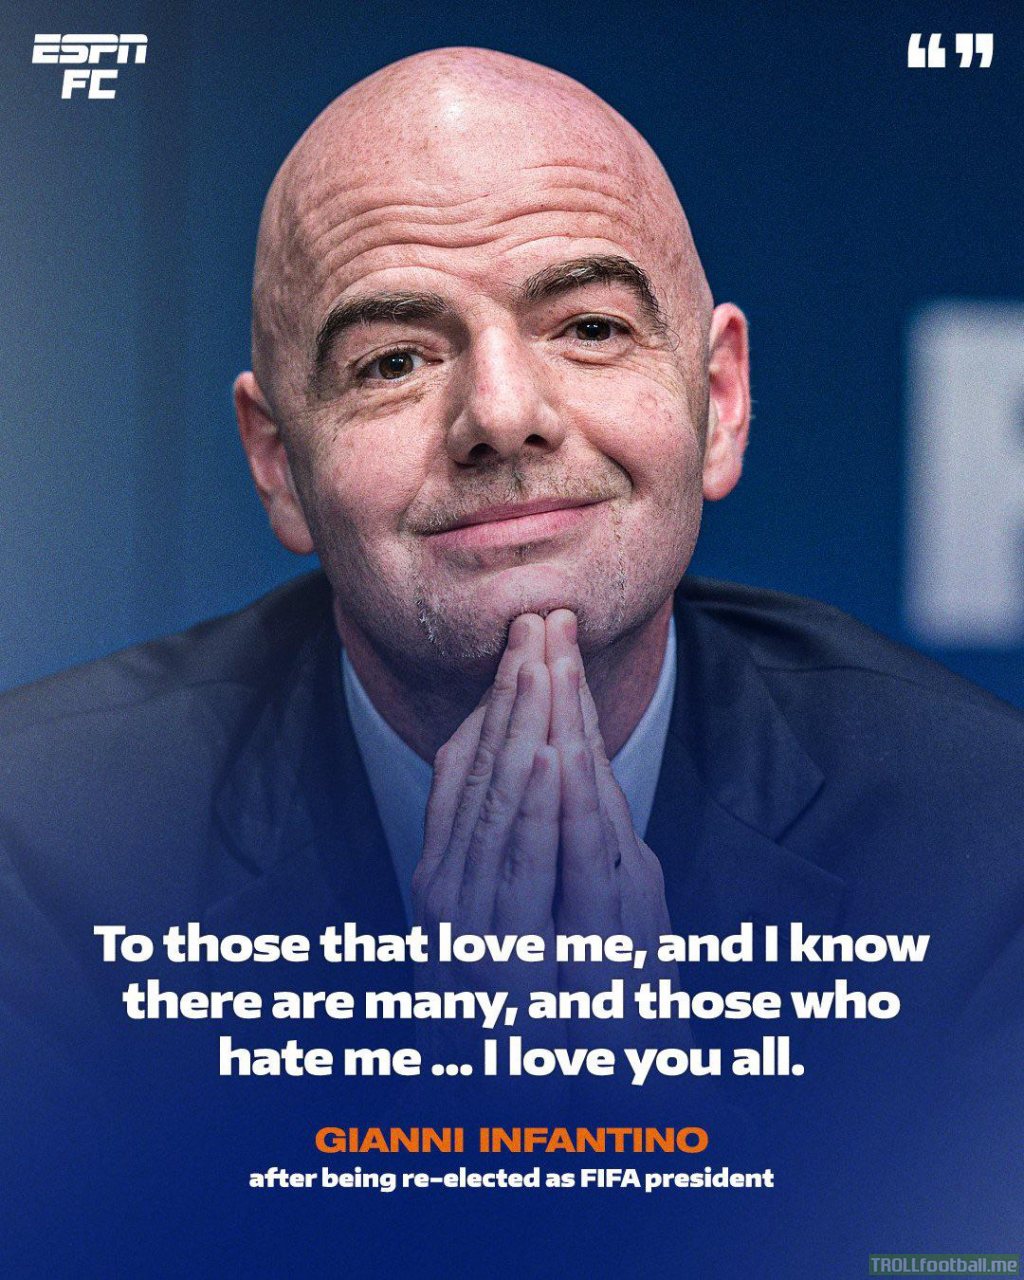 The great Infantino after his re-election